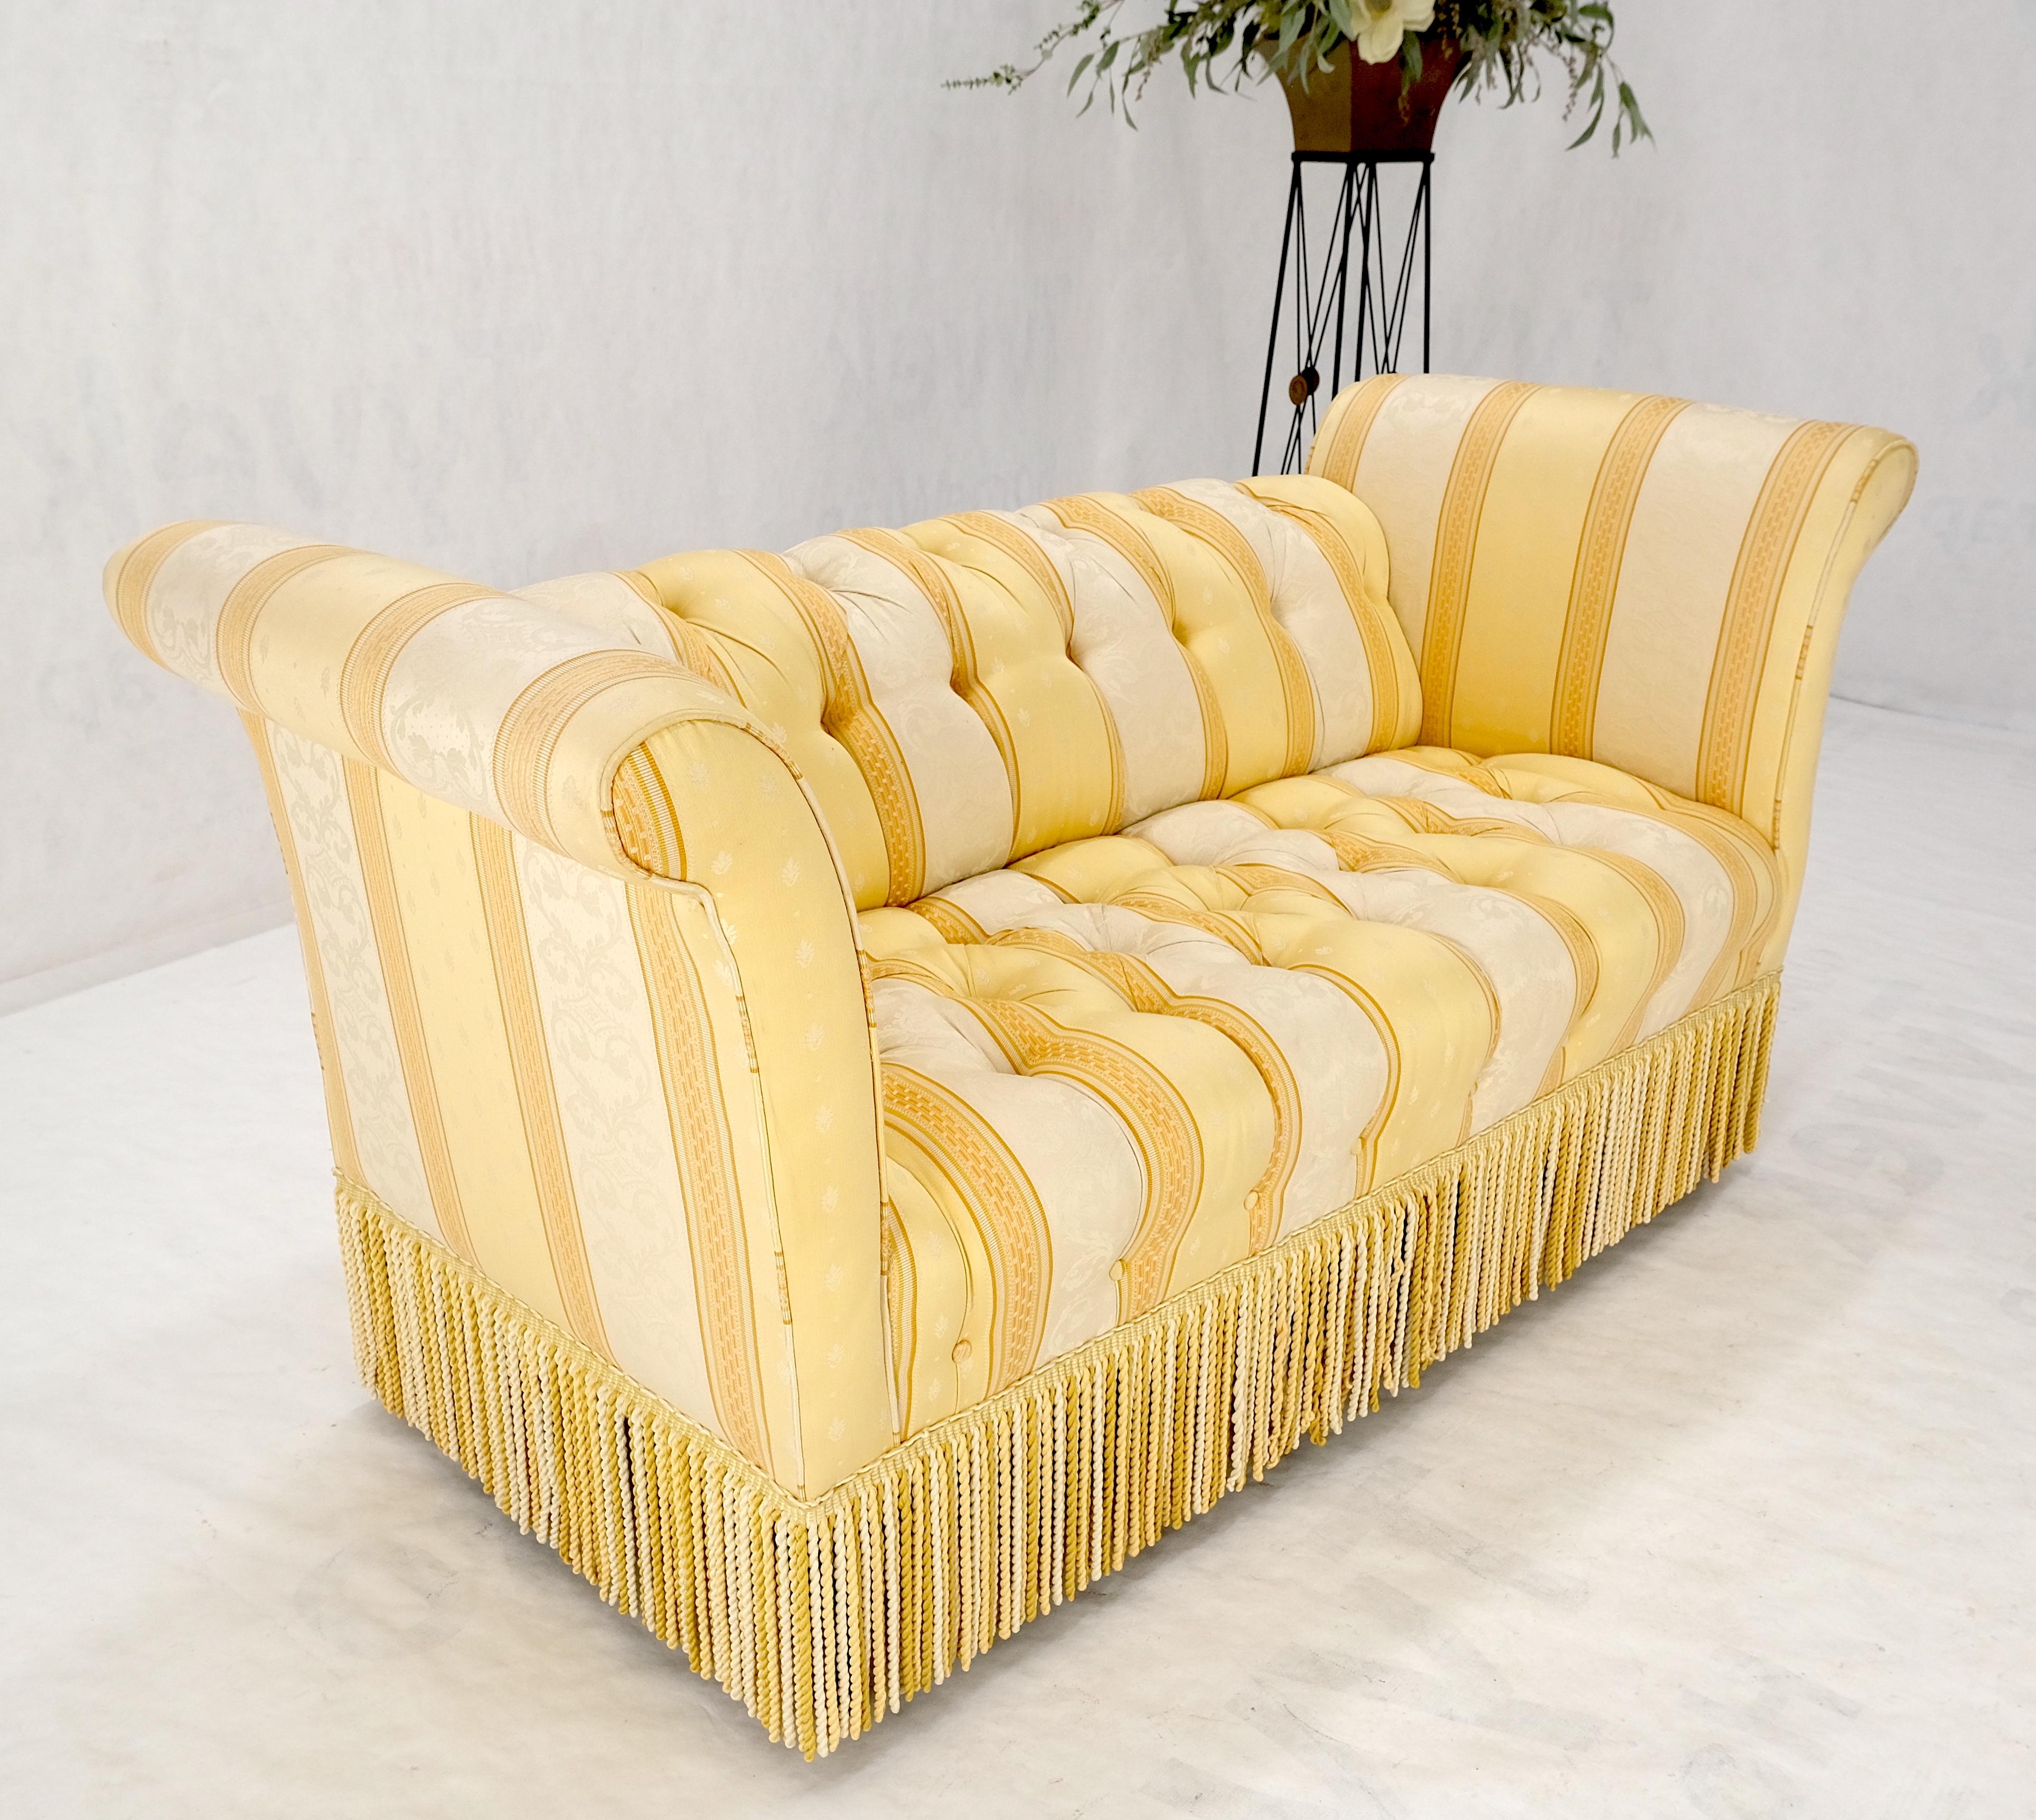 Gold & White Stripe Silk Upholstery Tufted Sofa Loveseat Tassels Decorated MINT! For Sale 5